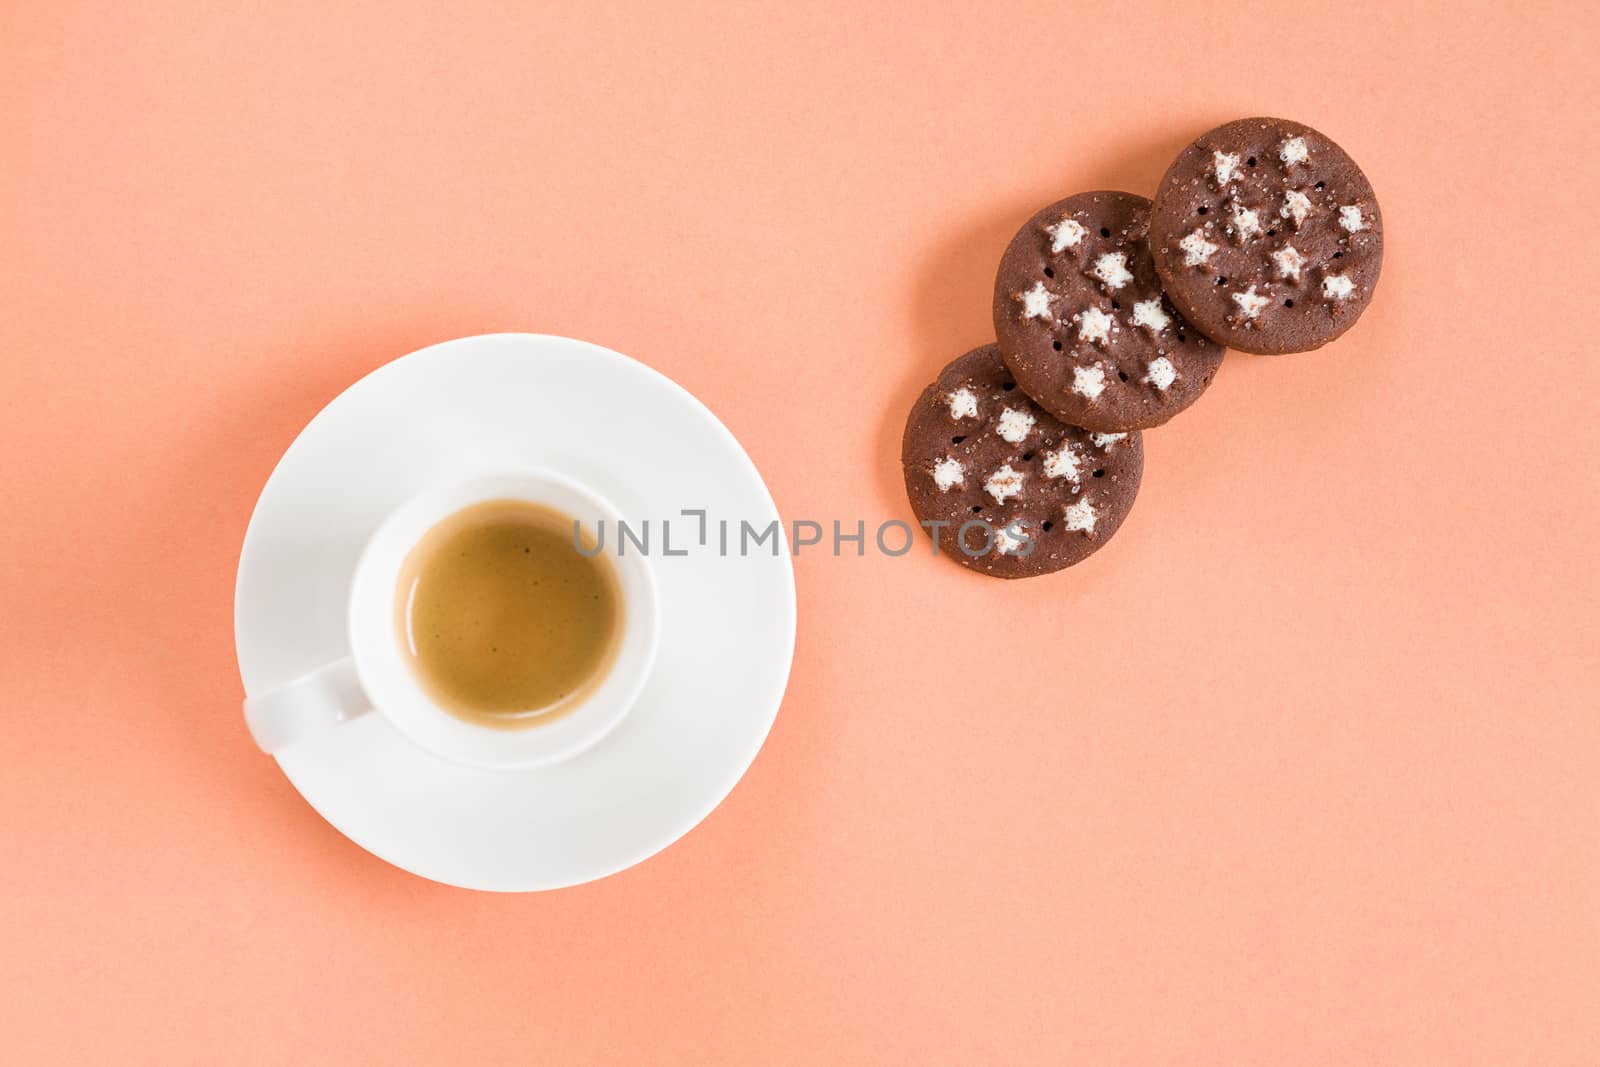 Italian espresso coffee and biscuits over a pink background seen from above